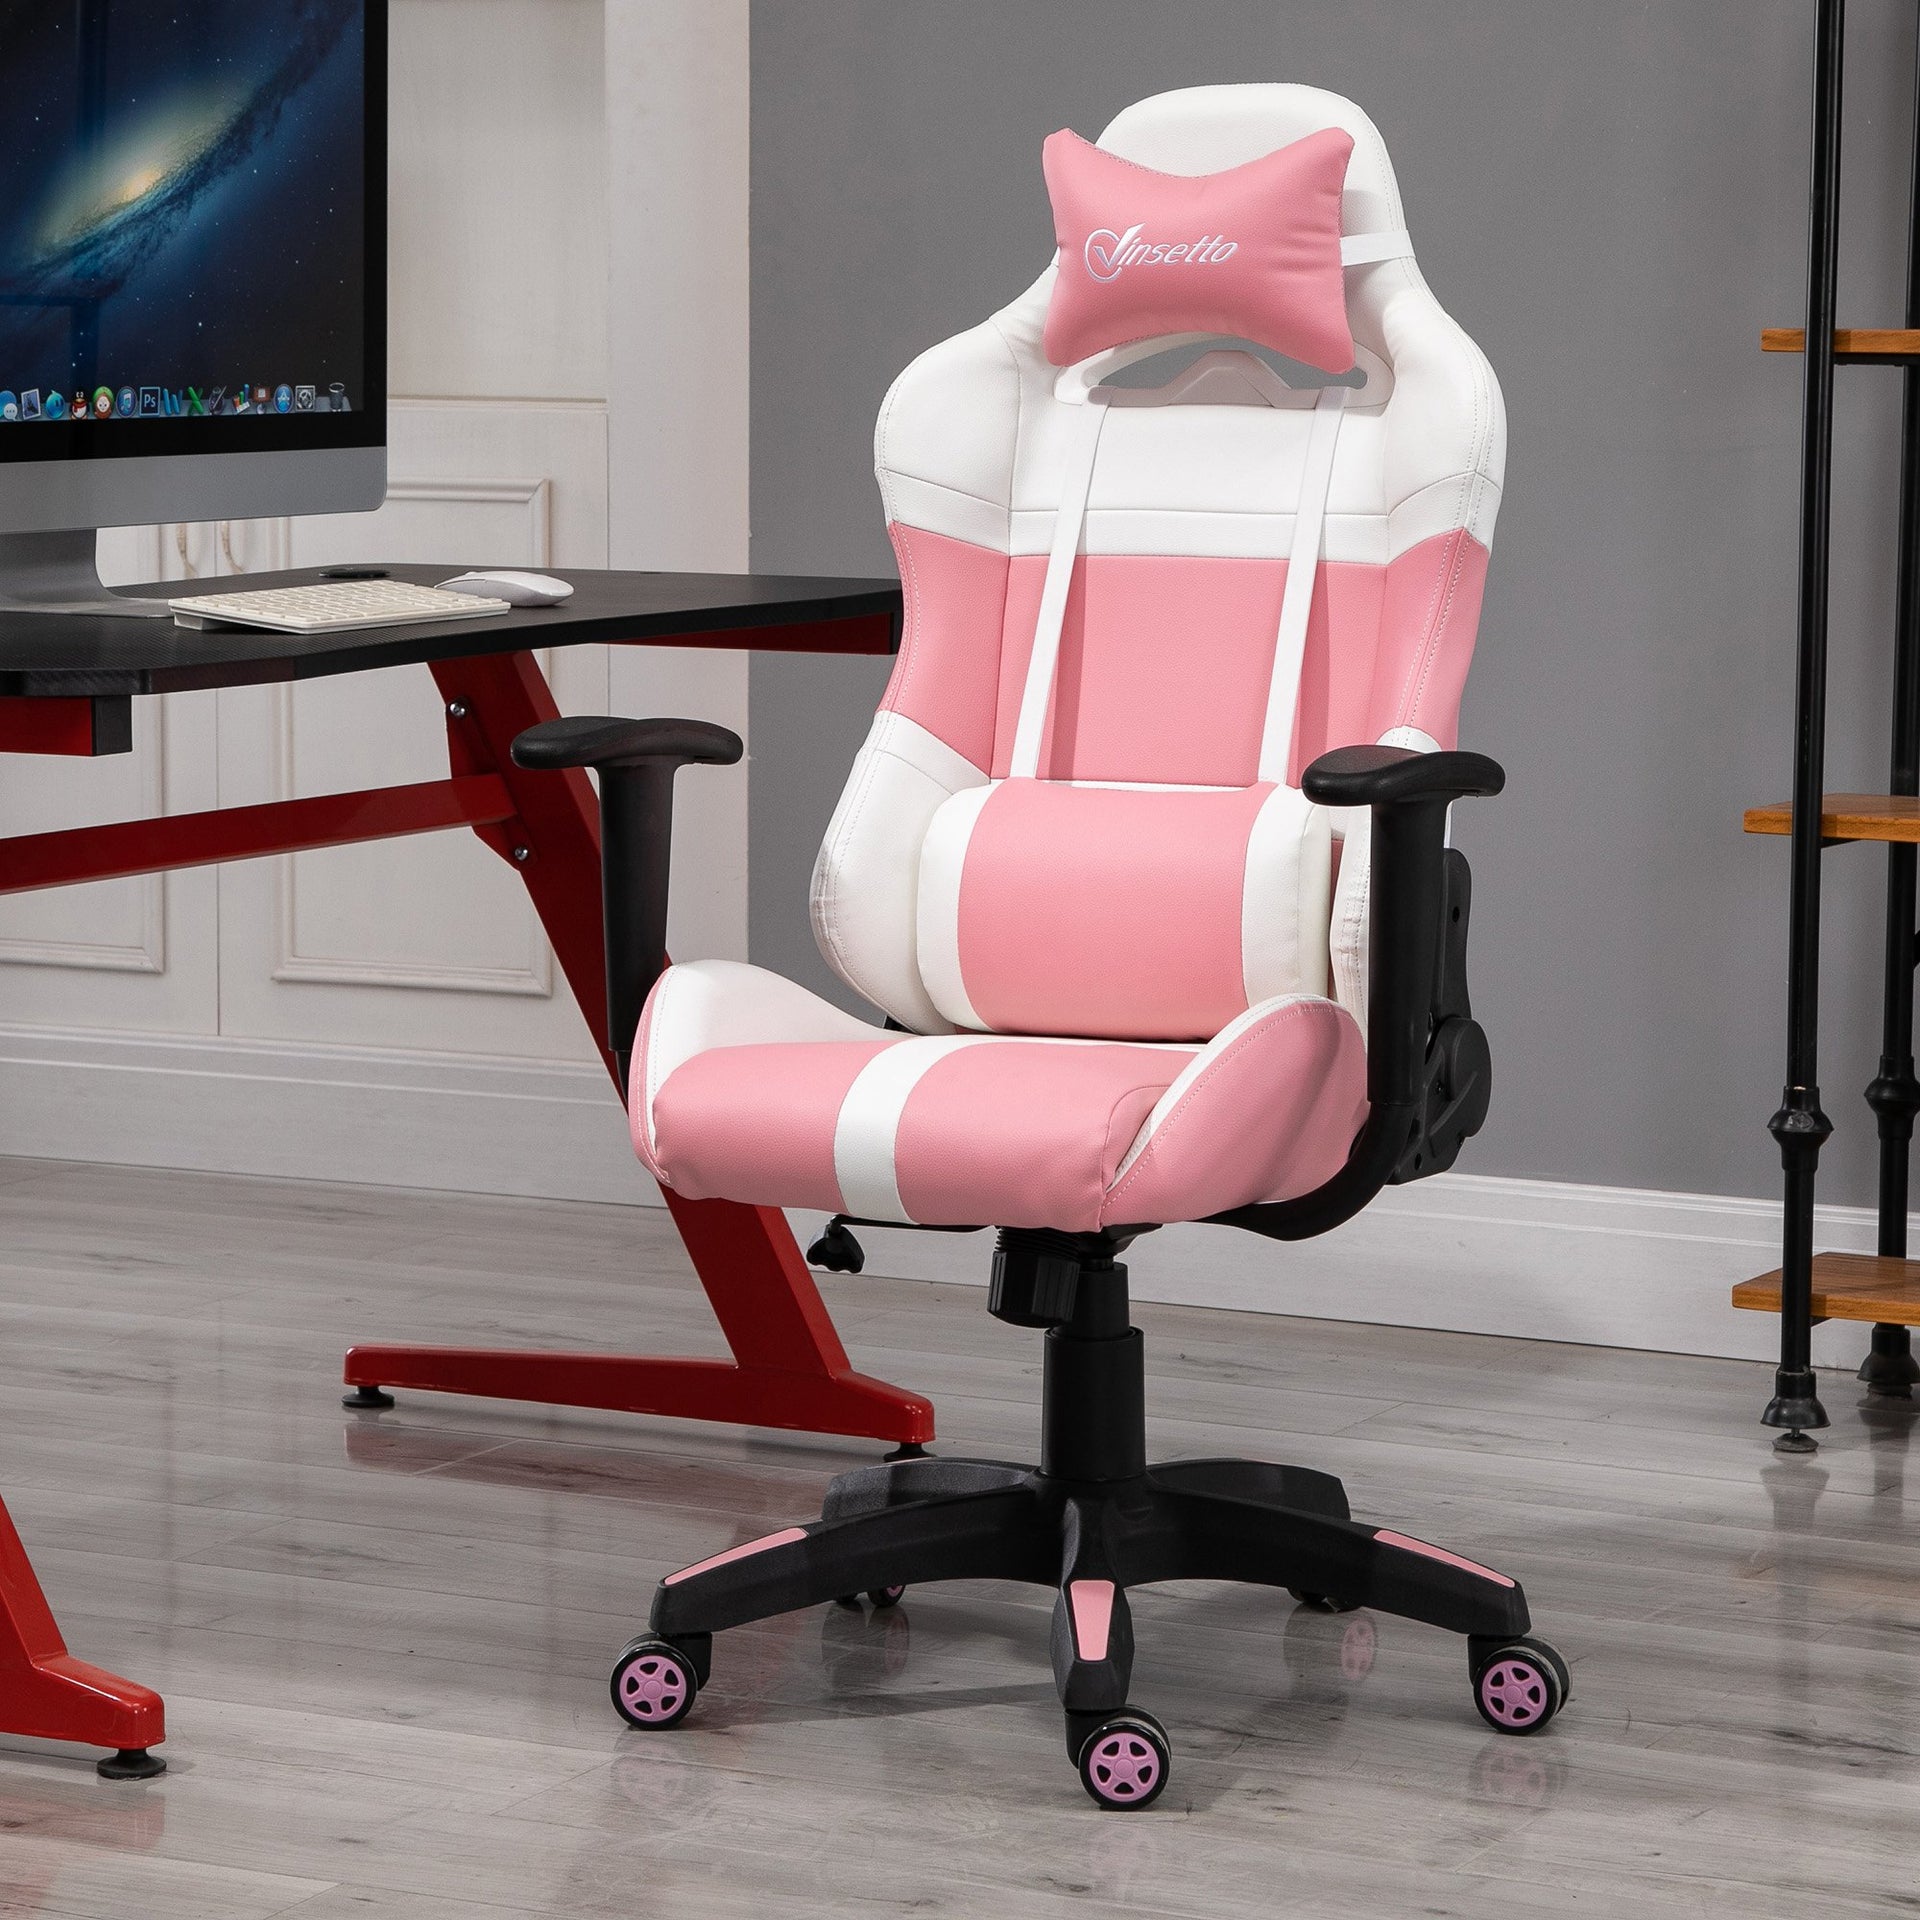 Vinsetto Racing Gaming Chair with Wheels  Removable Pillow Home Office